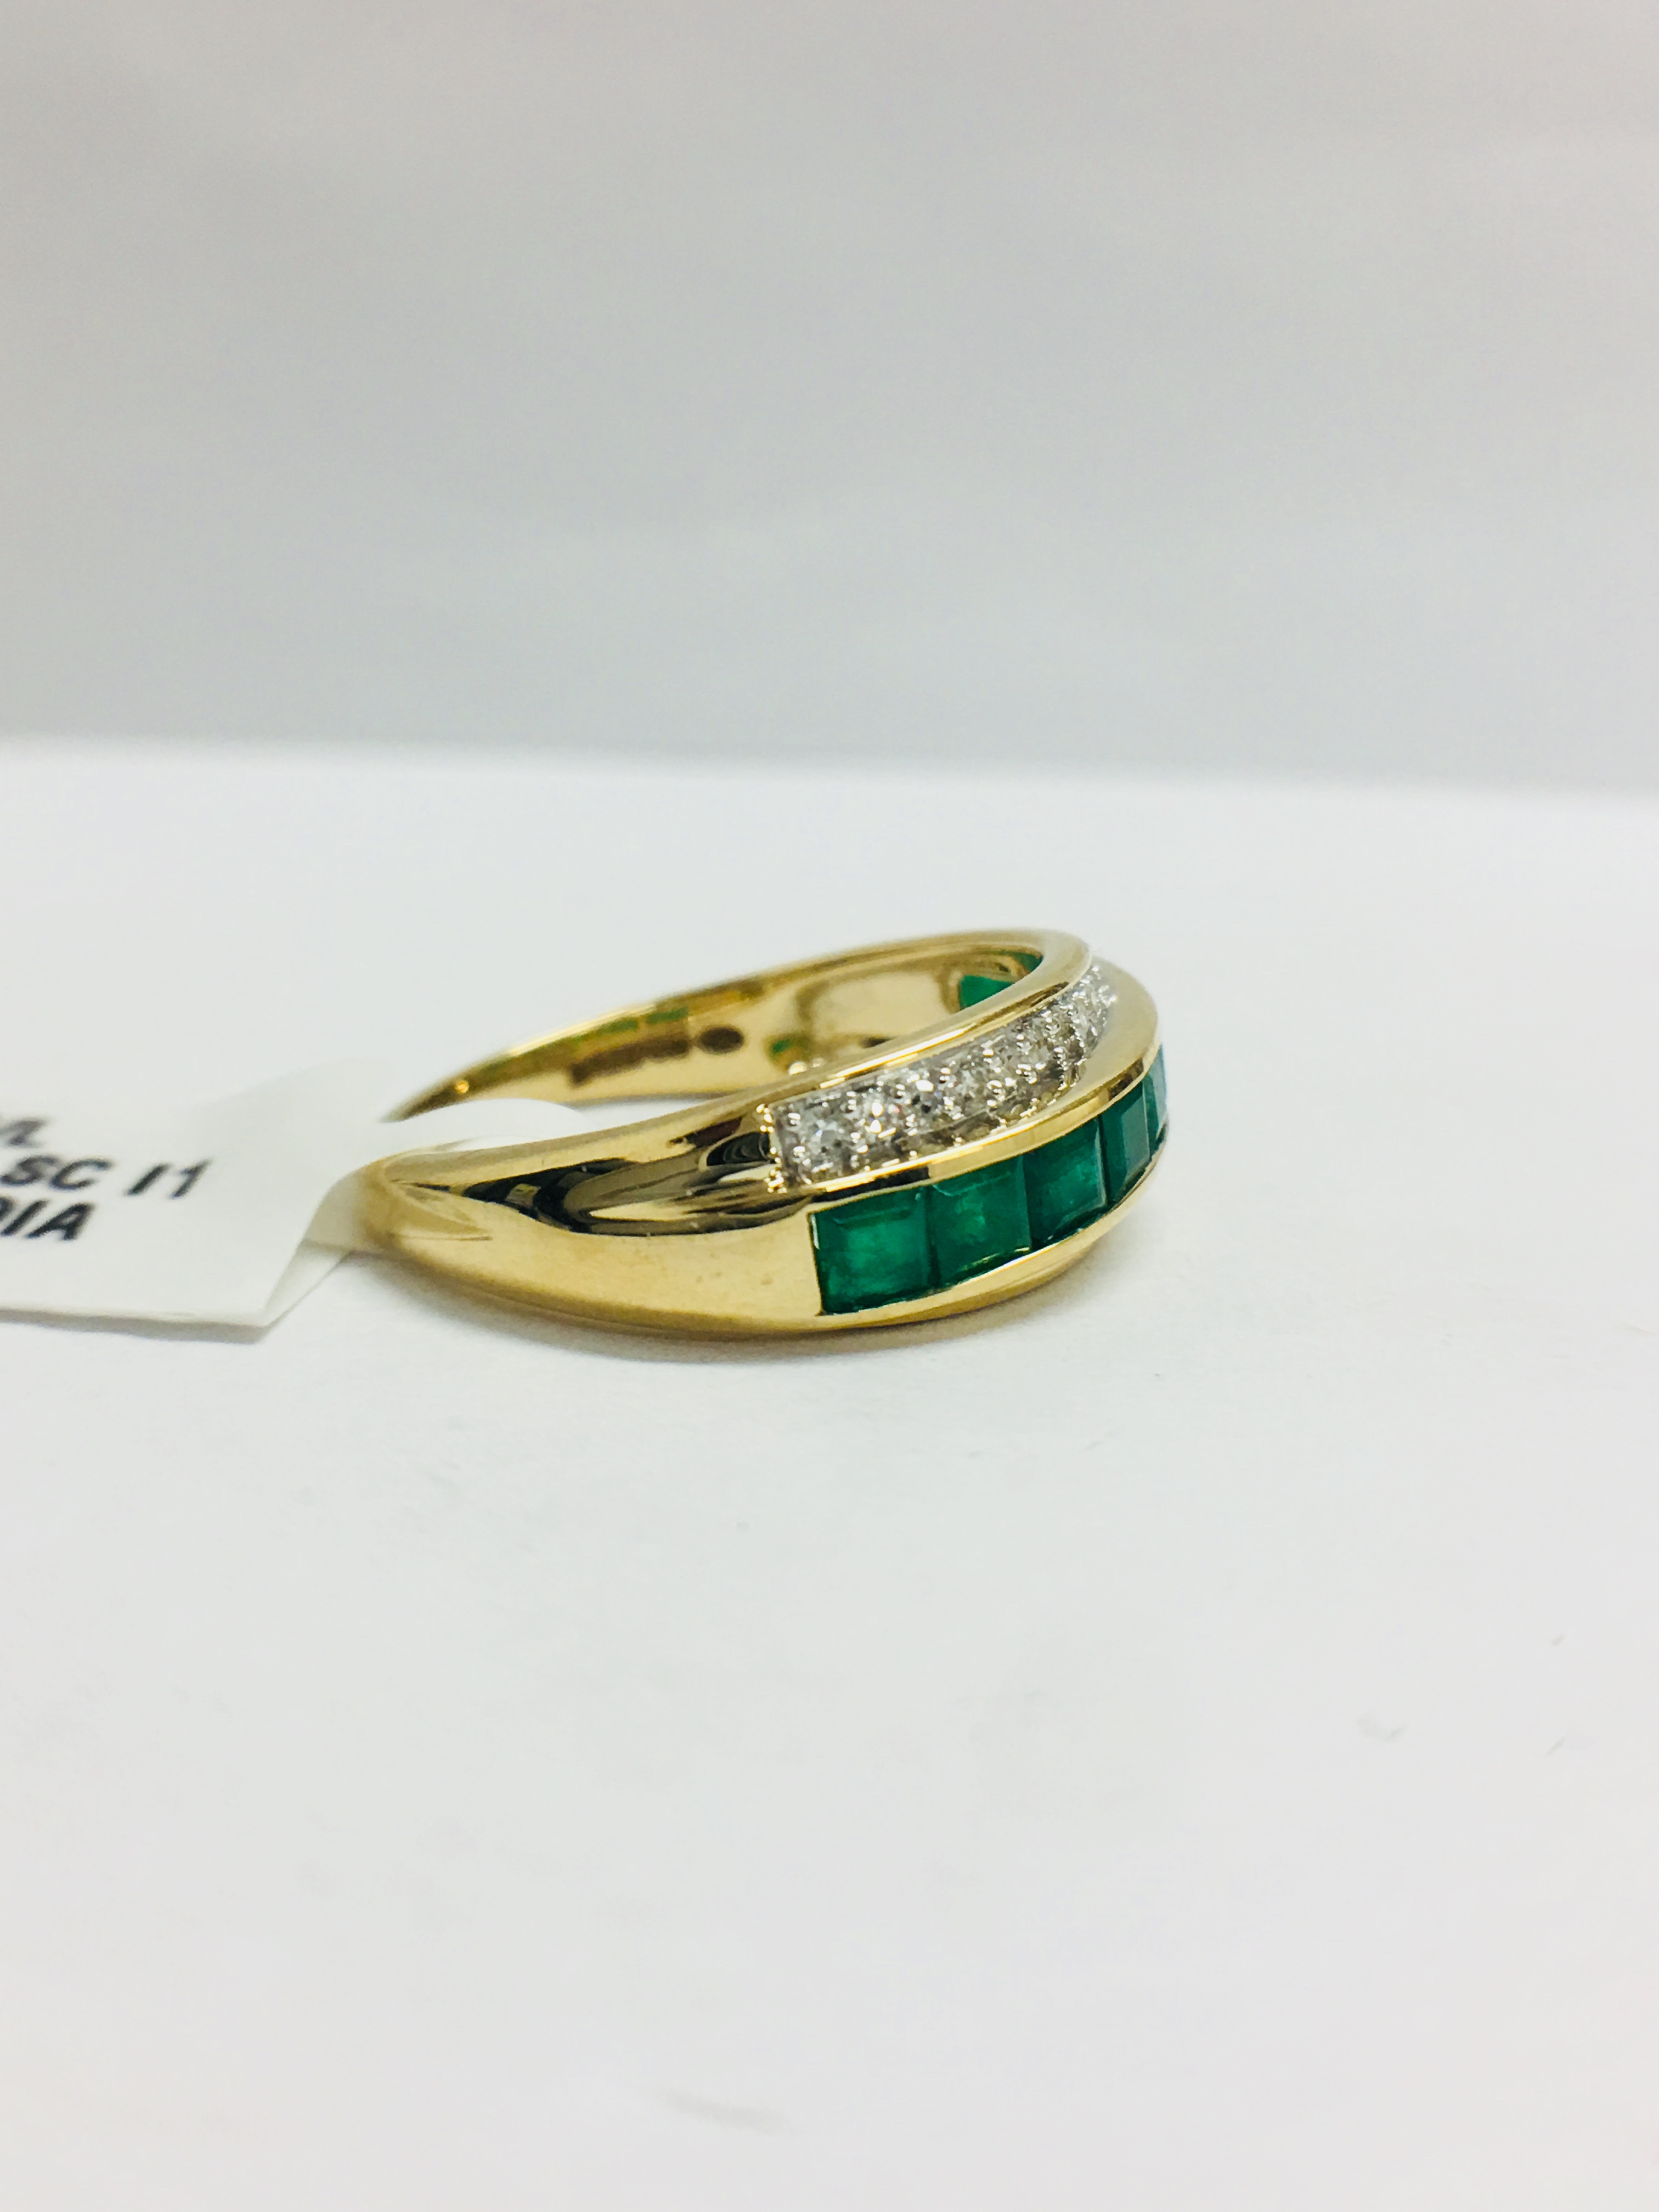 9Ct Yellow Gold Diamond Emerald Crossover Style Ring, - Image 7 of 10